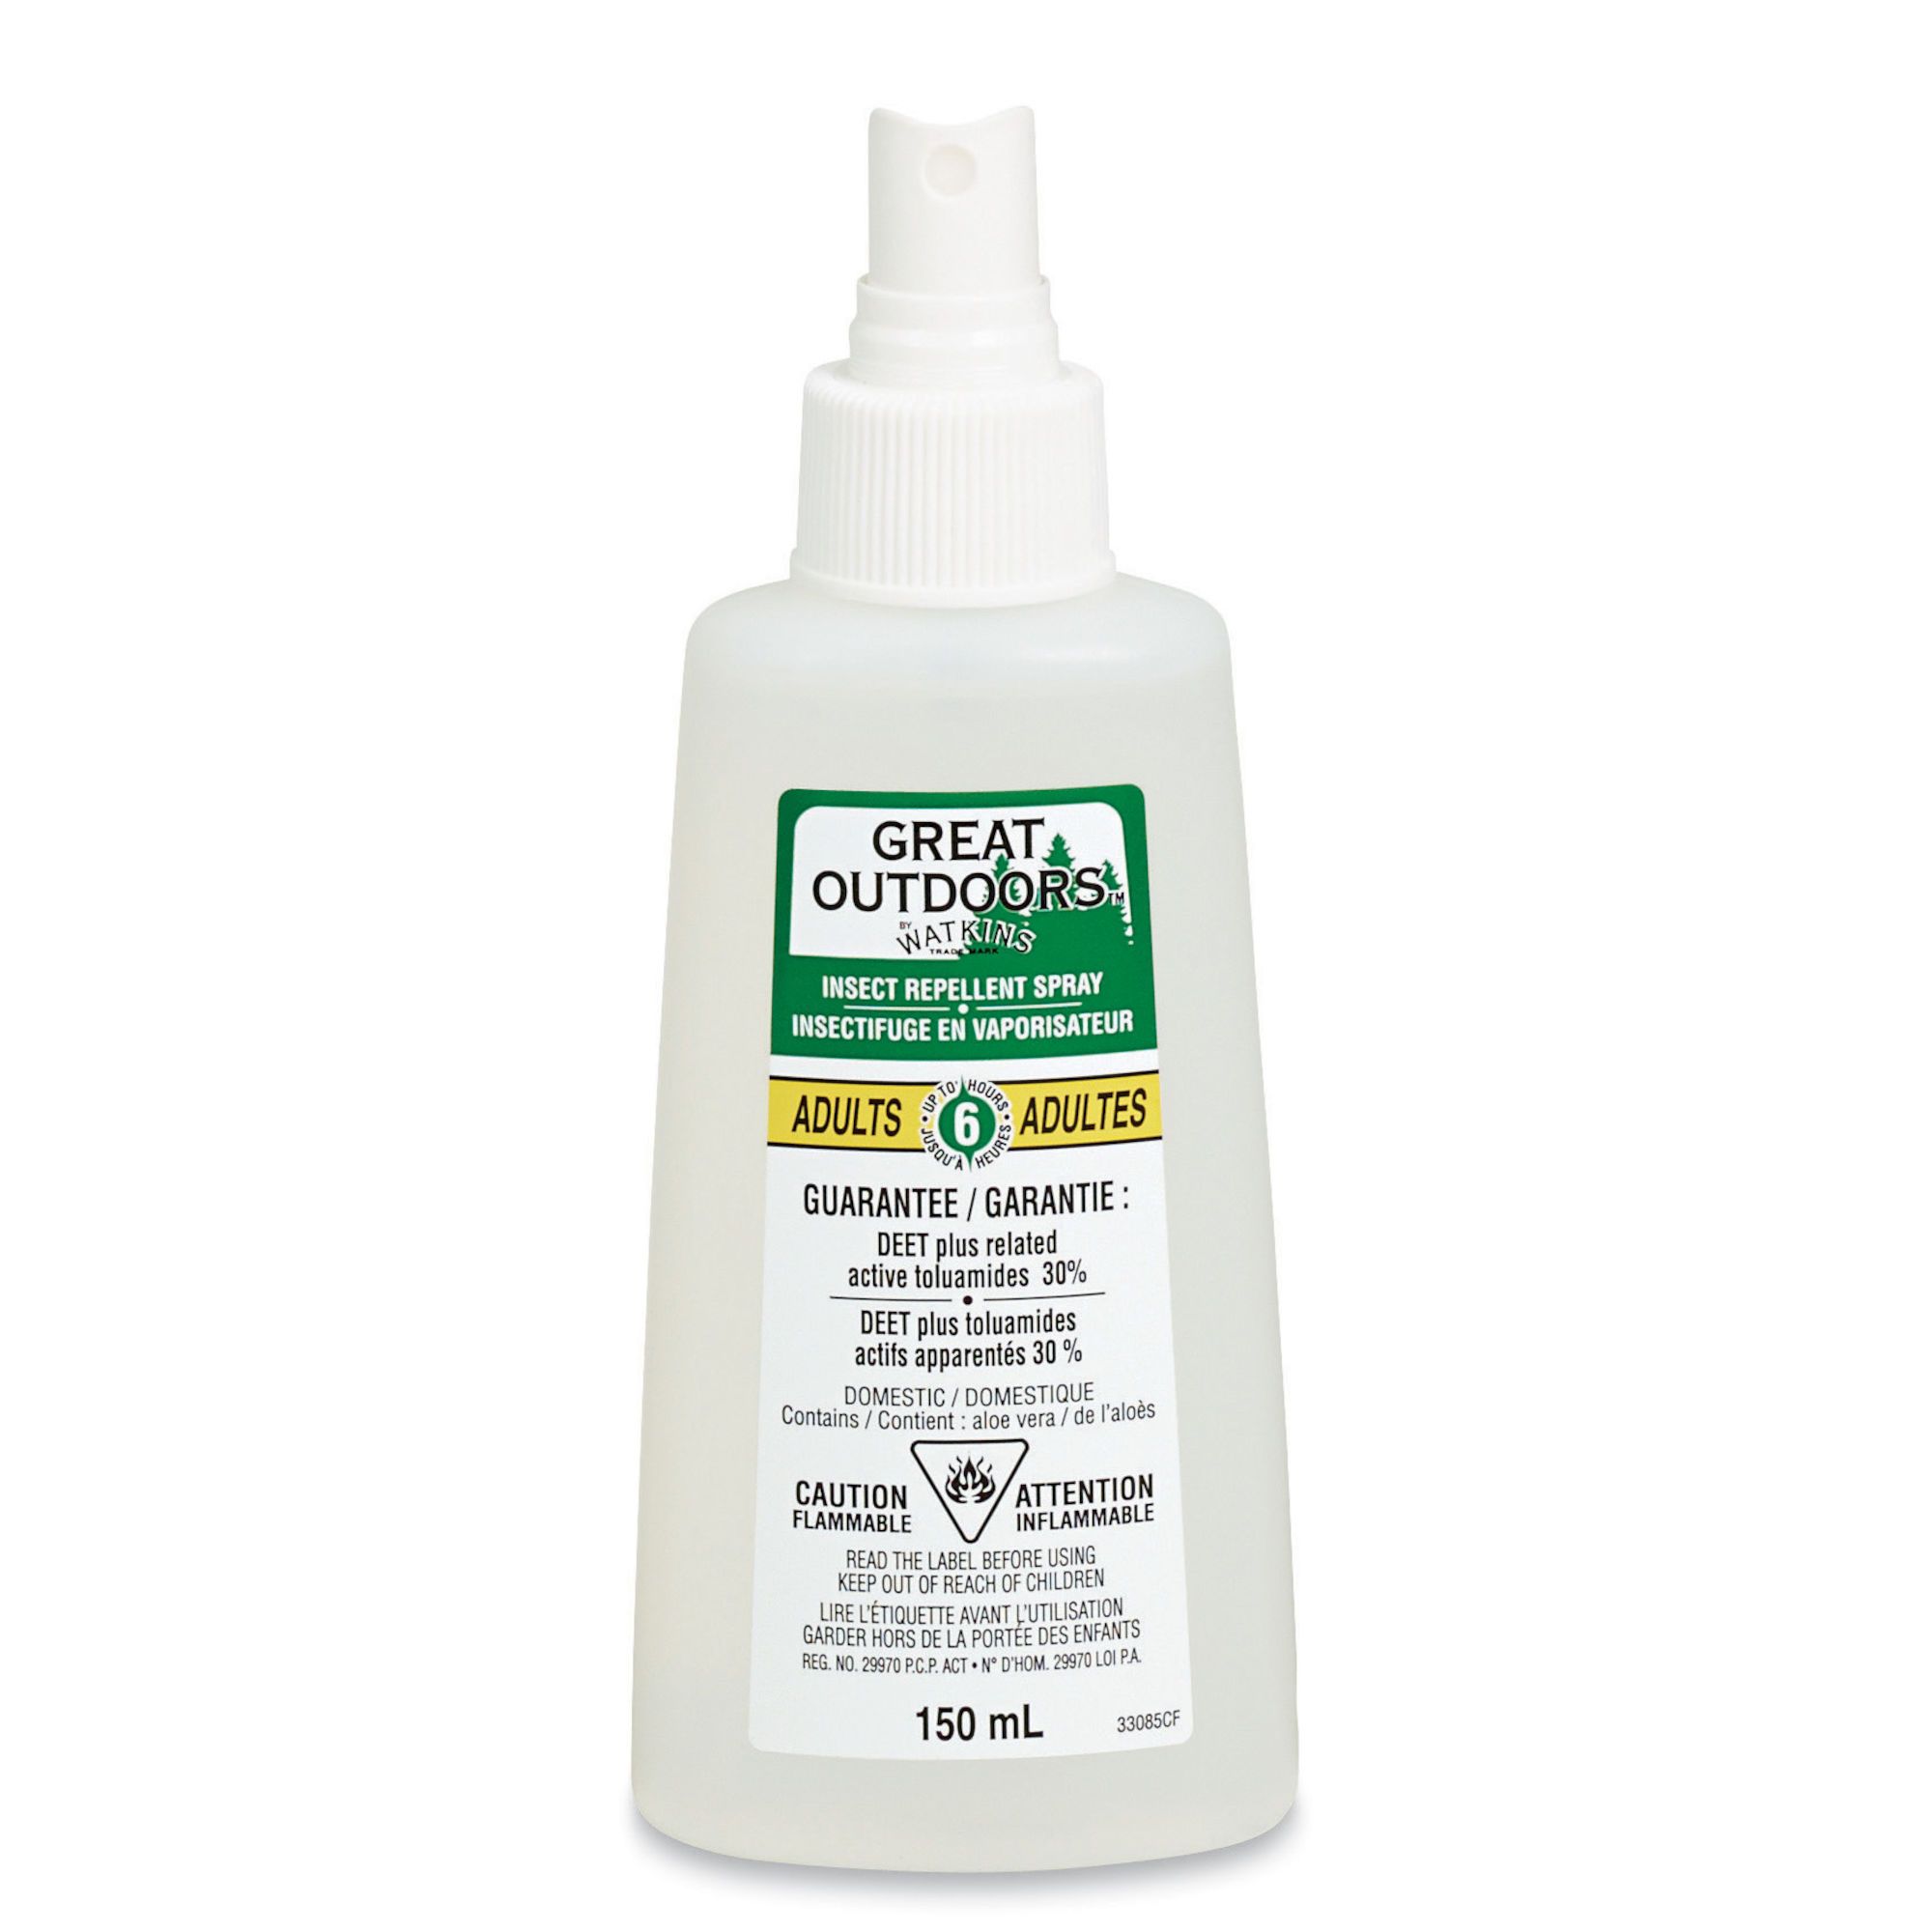 Insect repellent spray from WATKINS | BMR